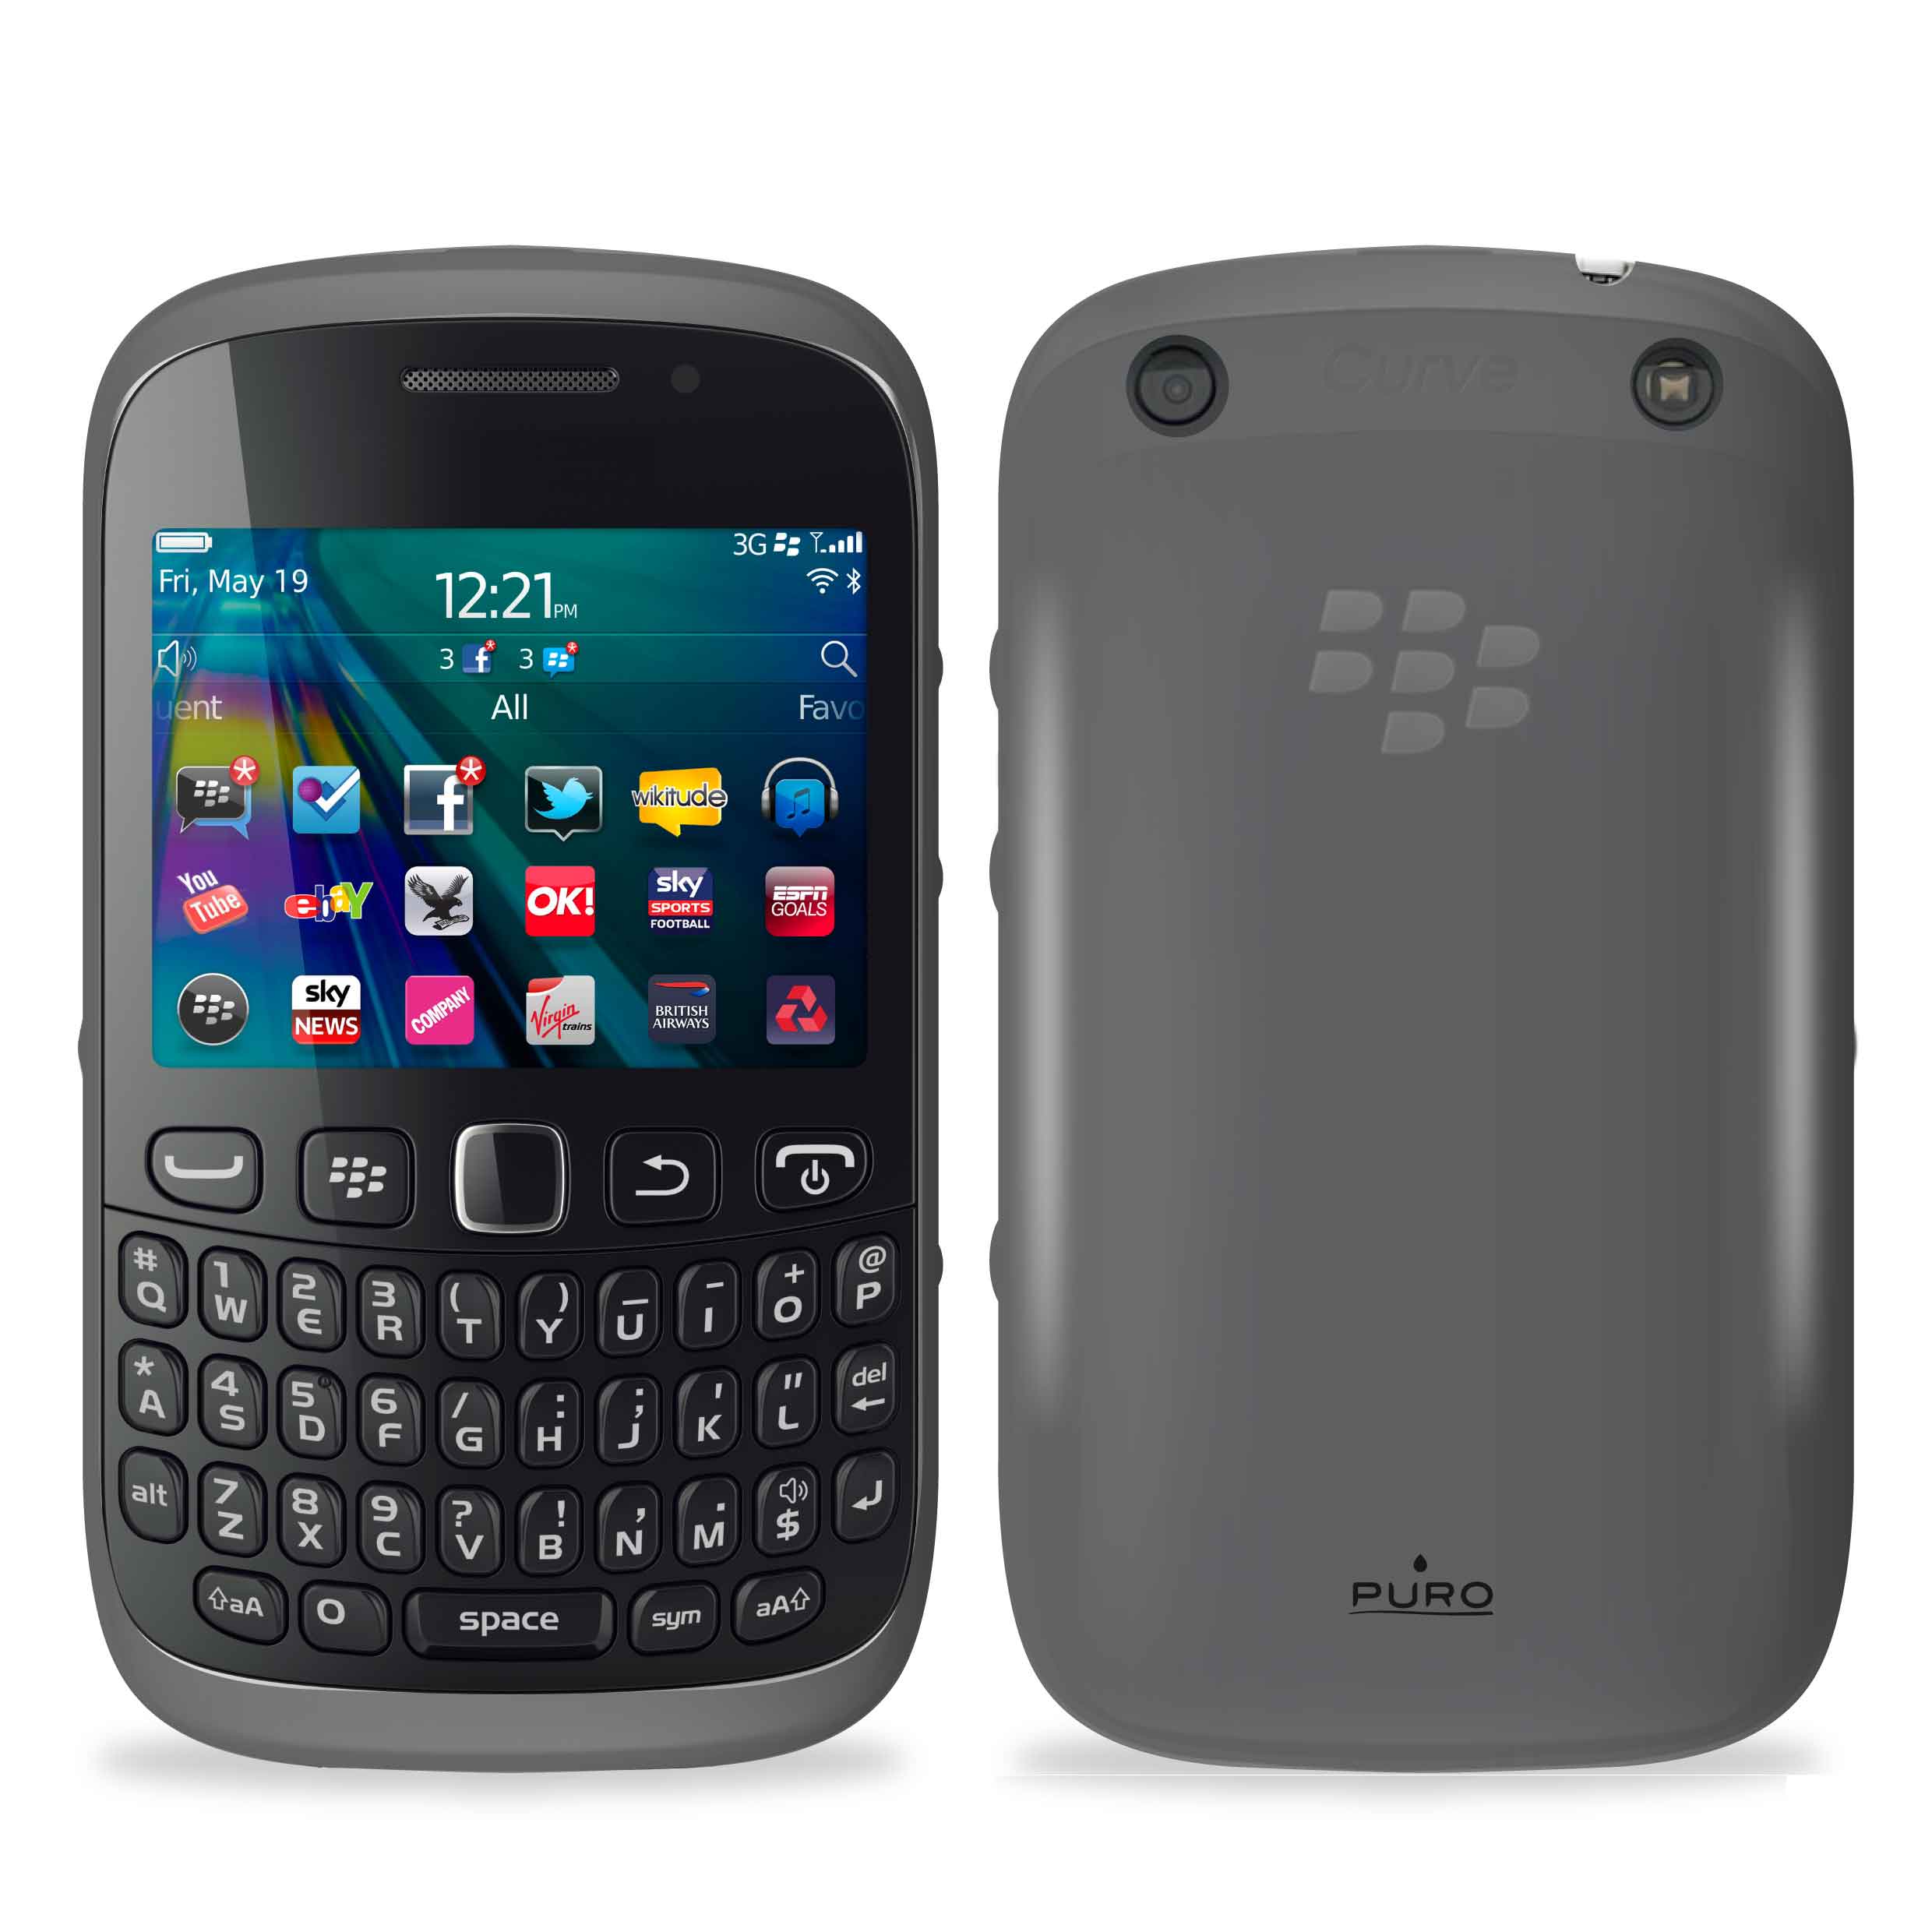 BlackBerry Curve 9320 specs, review, release date - PhonesData